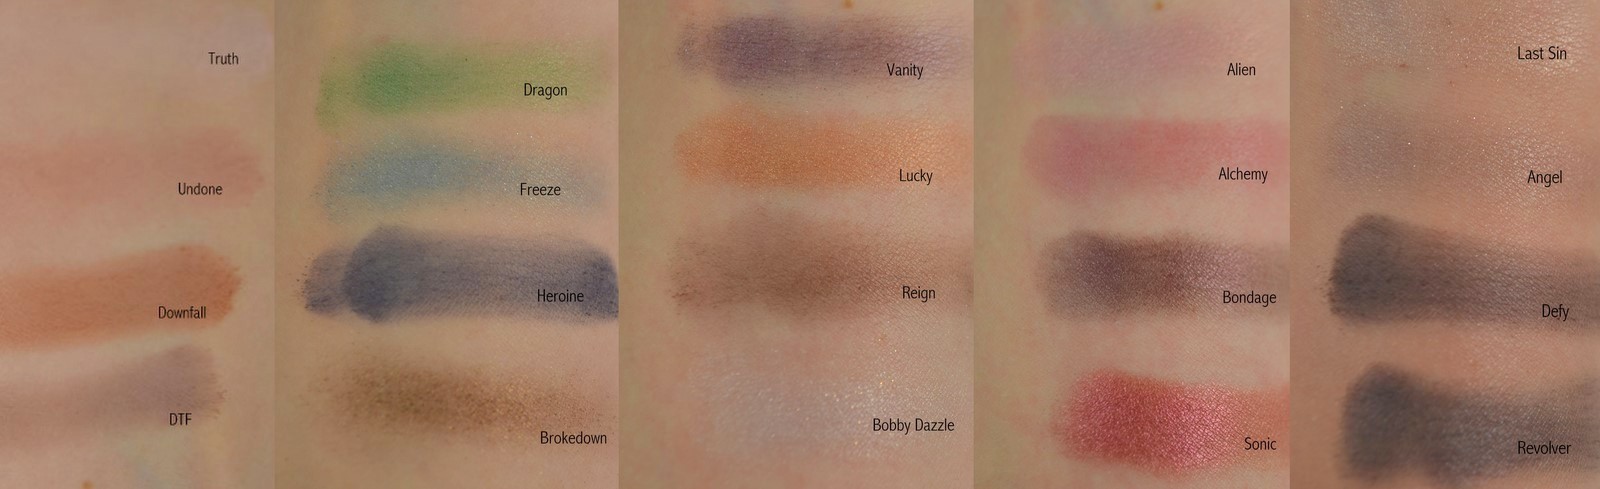 urabn-decay-vice-palette-swatches-1